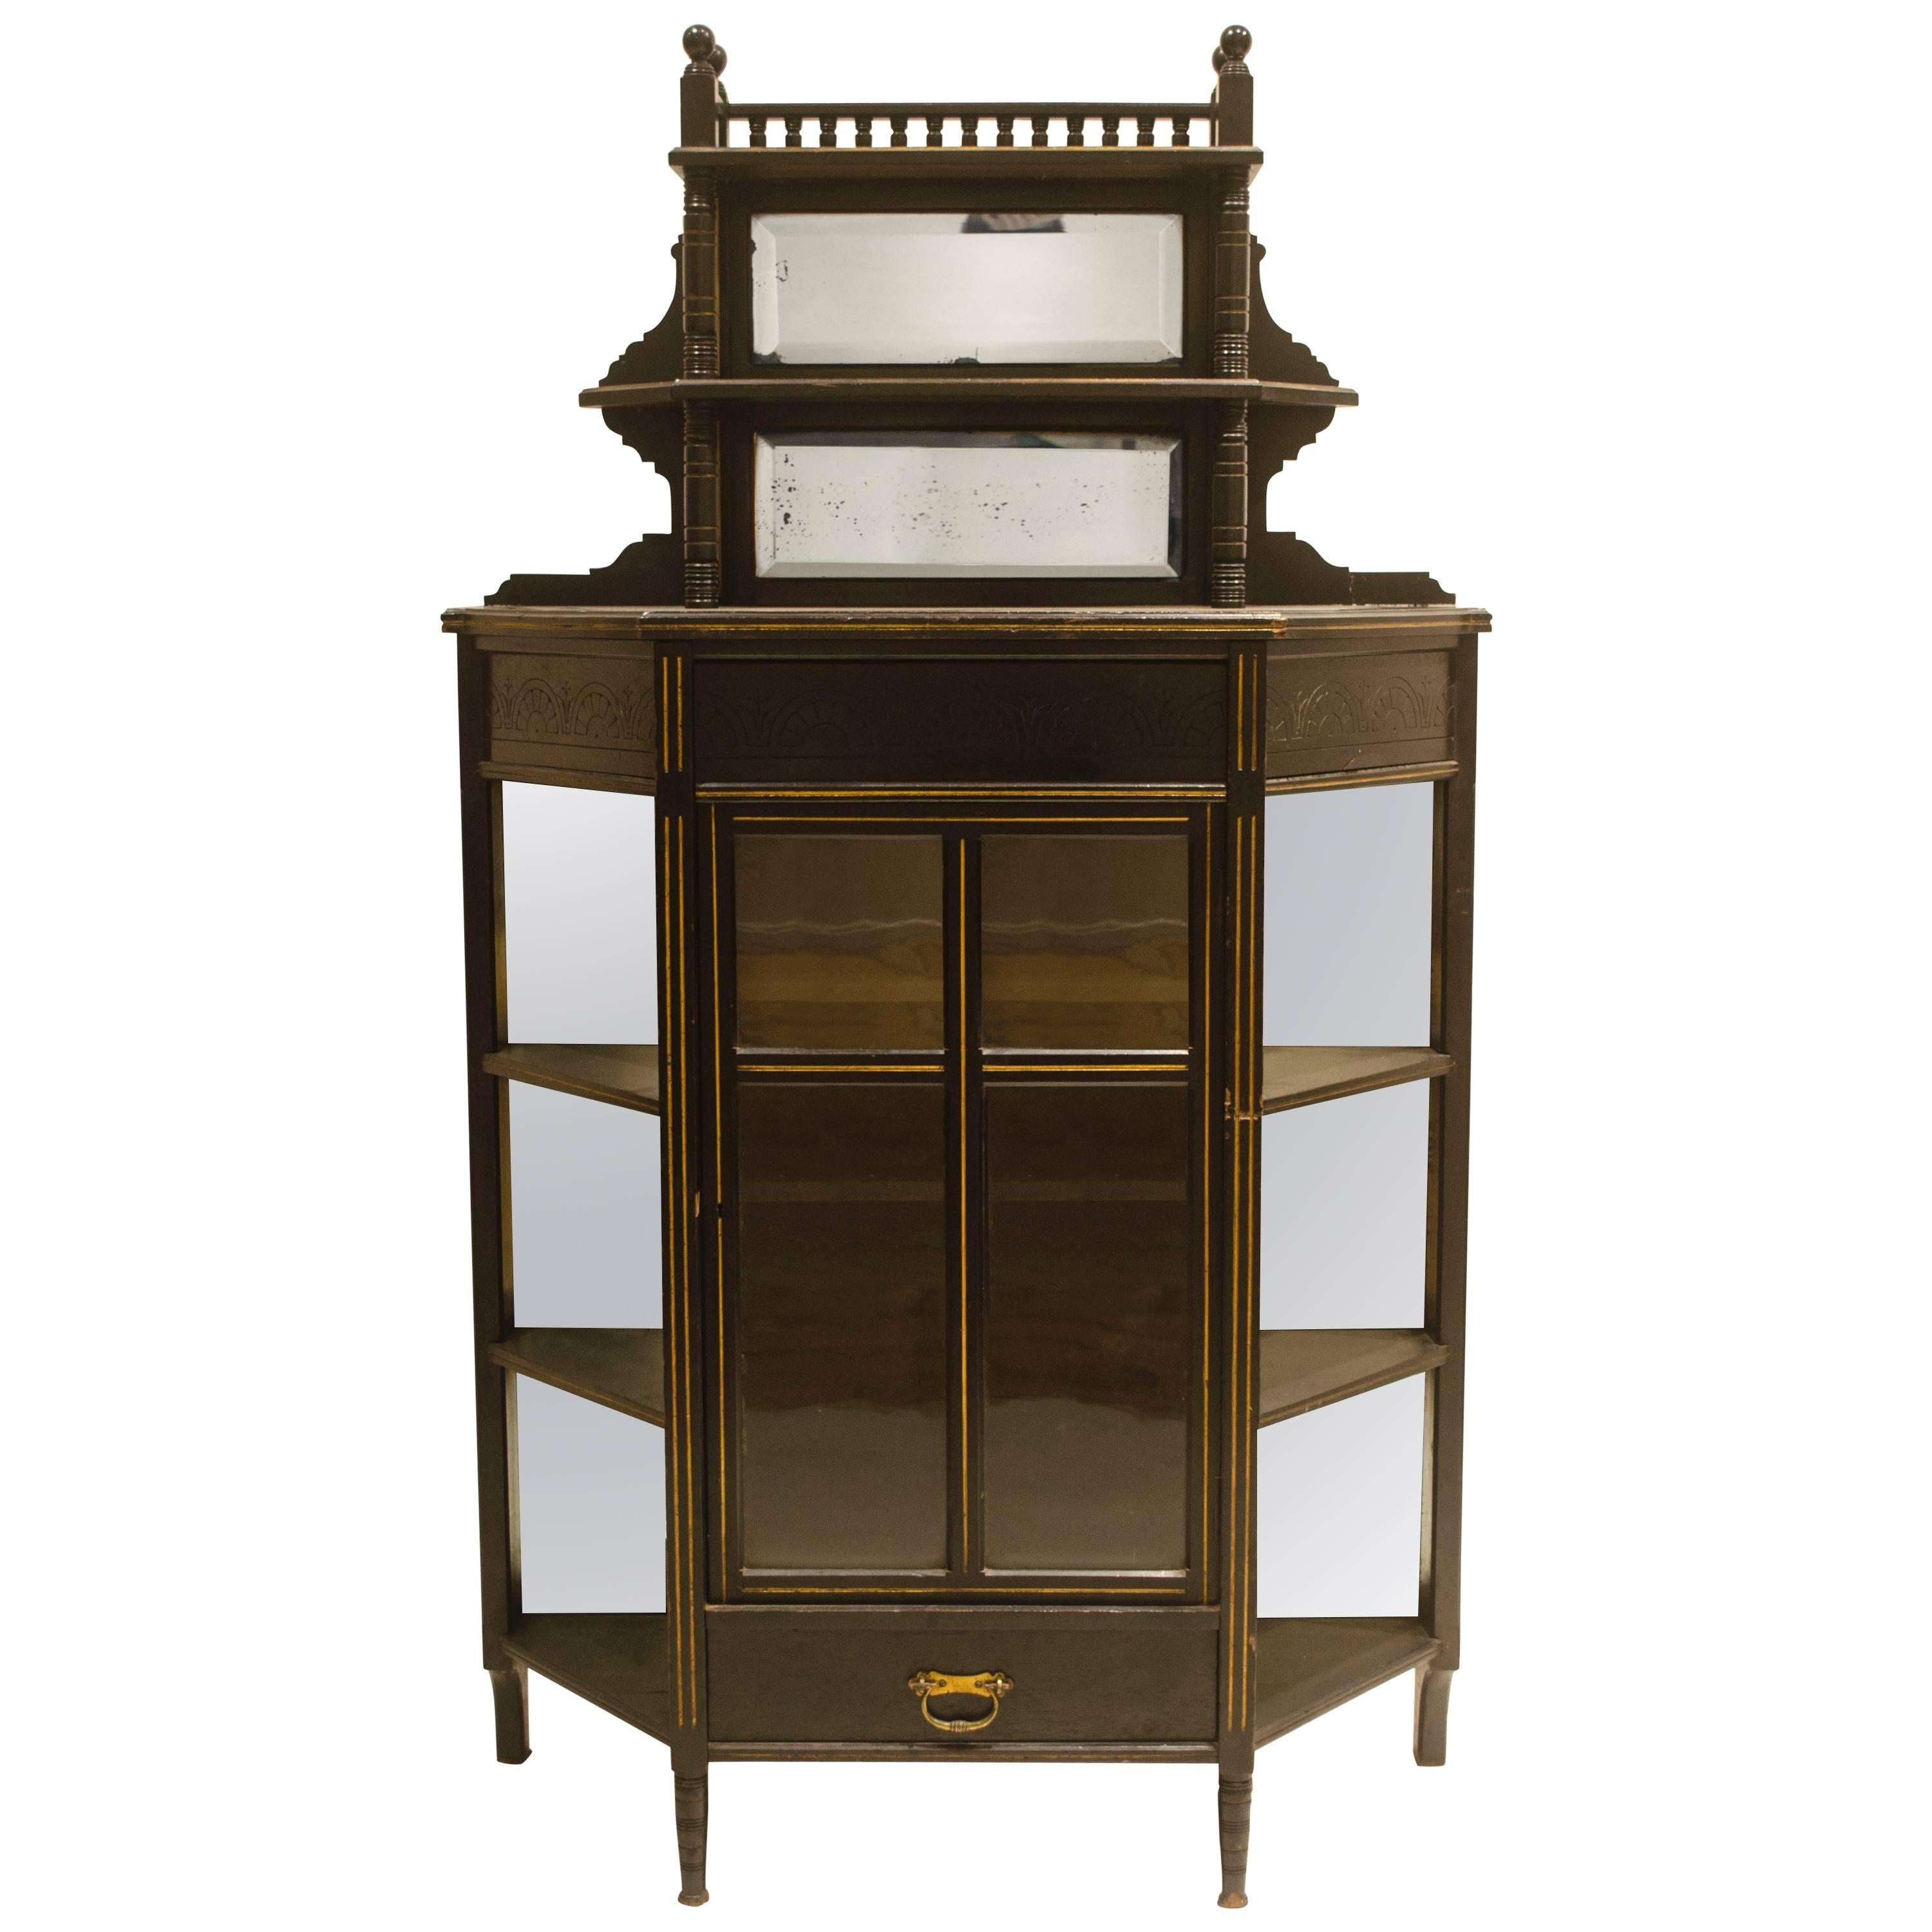 E W Godwin, William Watt, an Important Anglo-Japanese Ebonised Display Cabinet For Sale